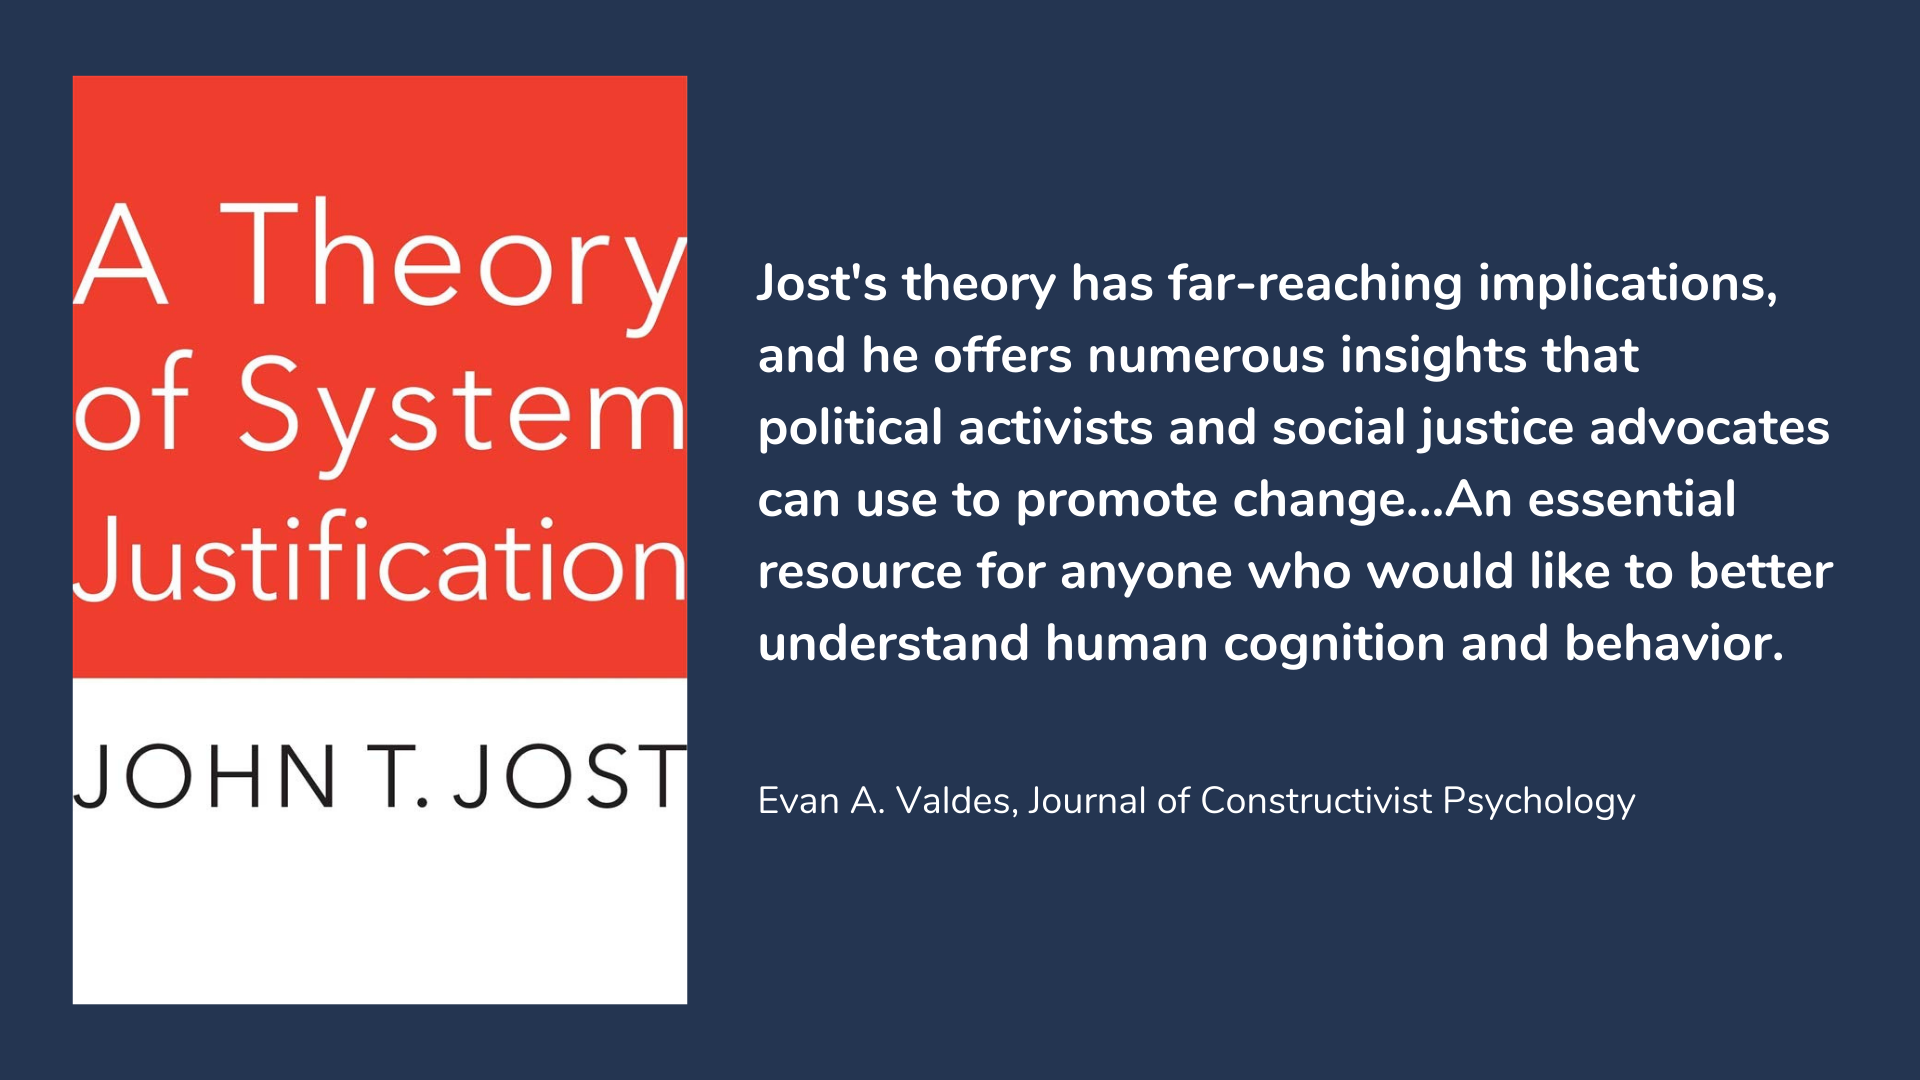 A Theory of System Justification, book cover and description.